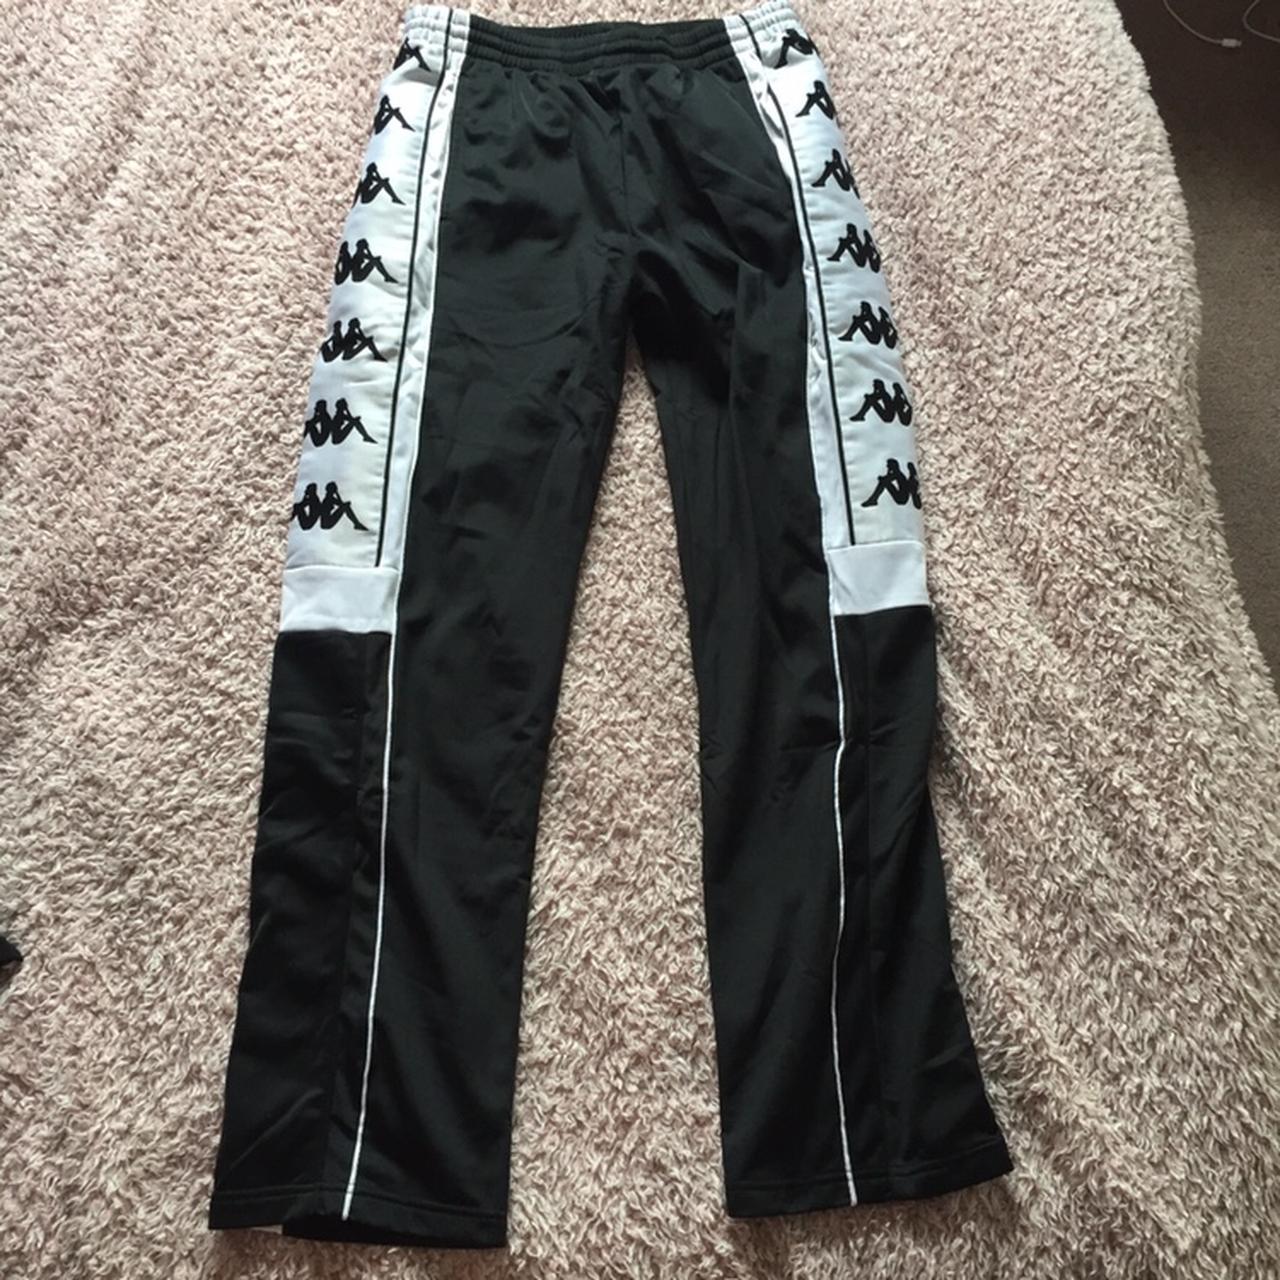 Kappa black and white poppers joggers These are so... - Depop